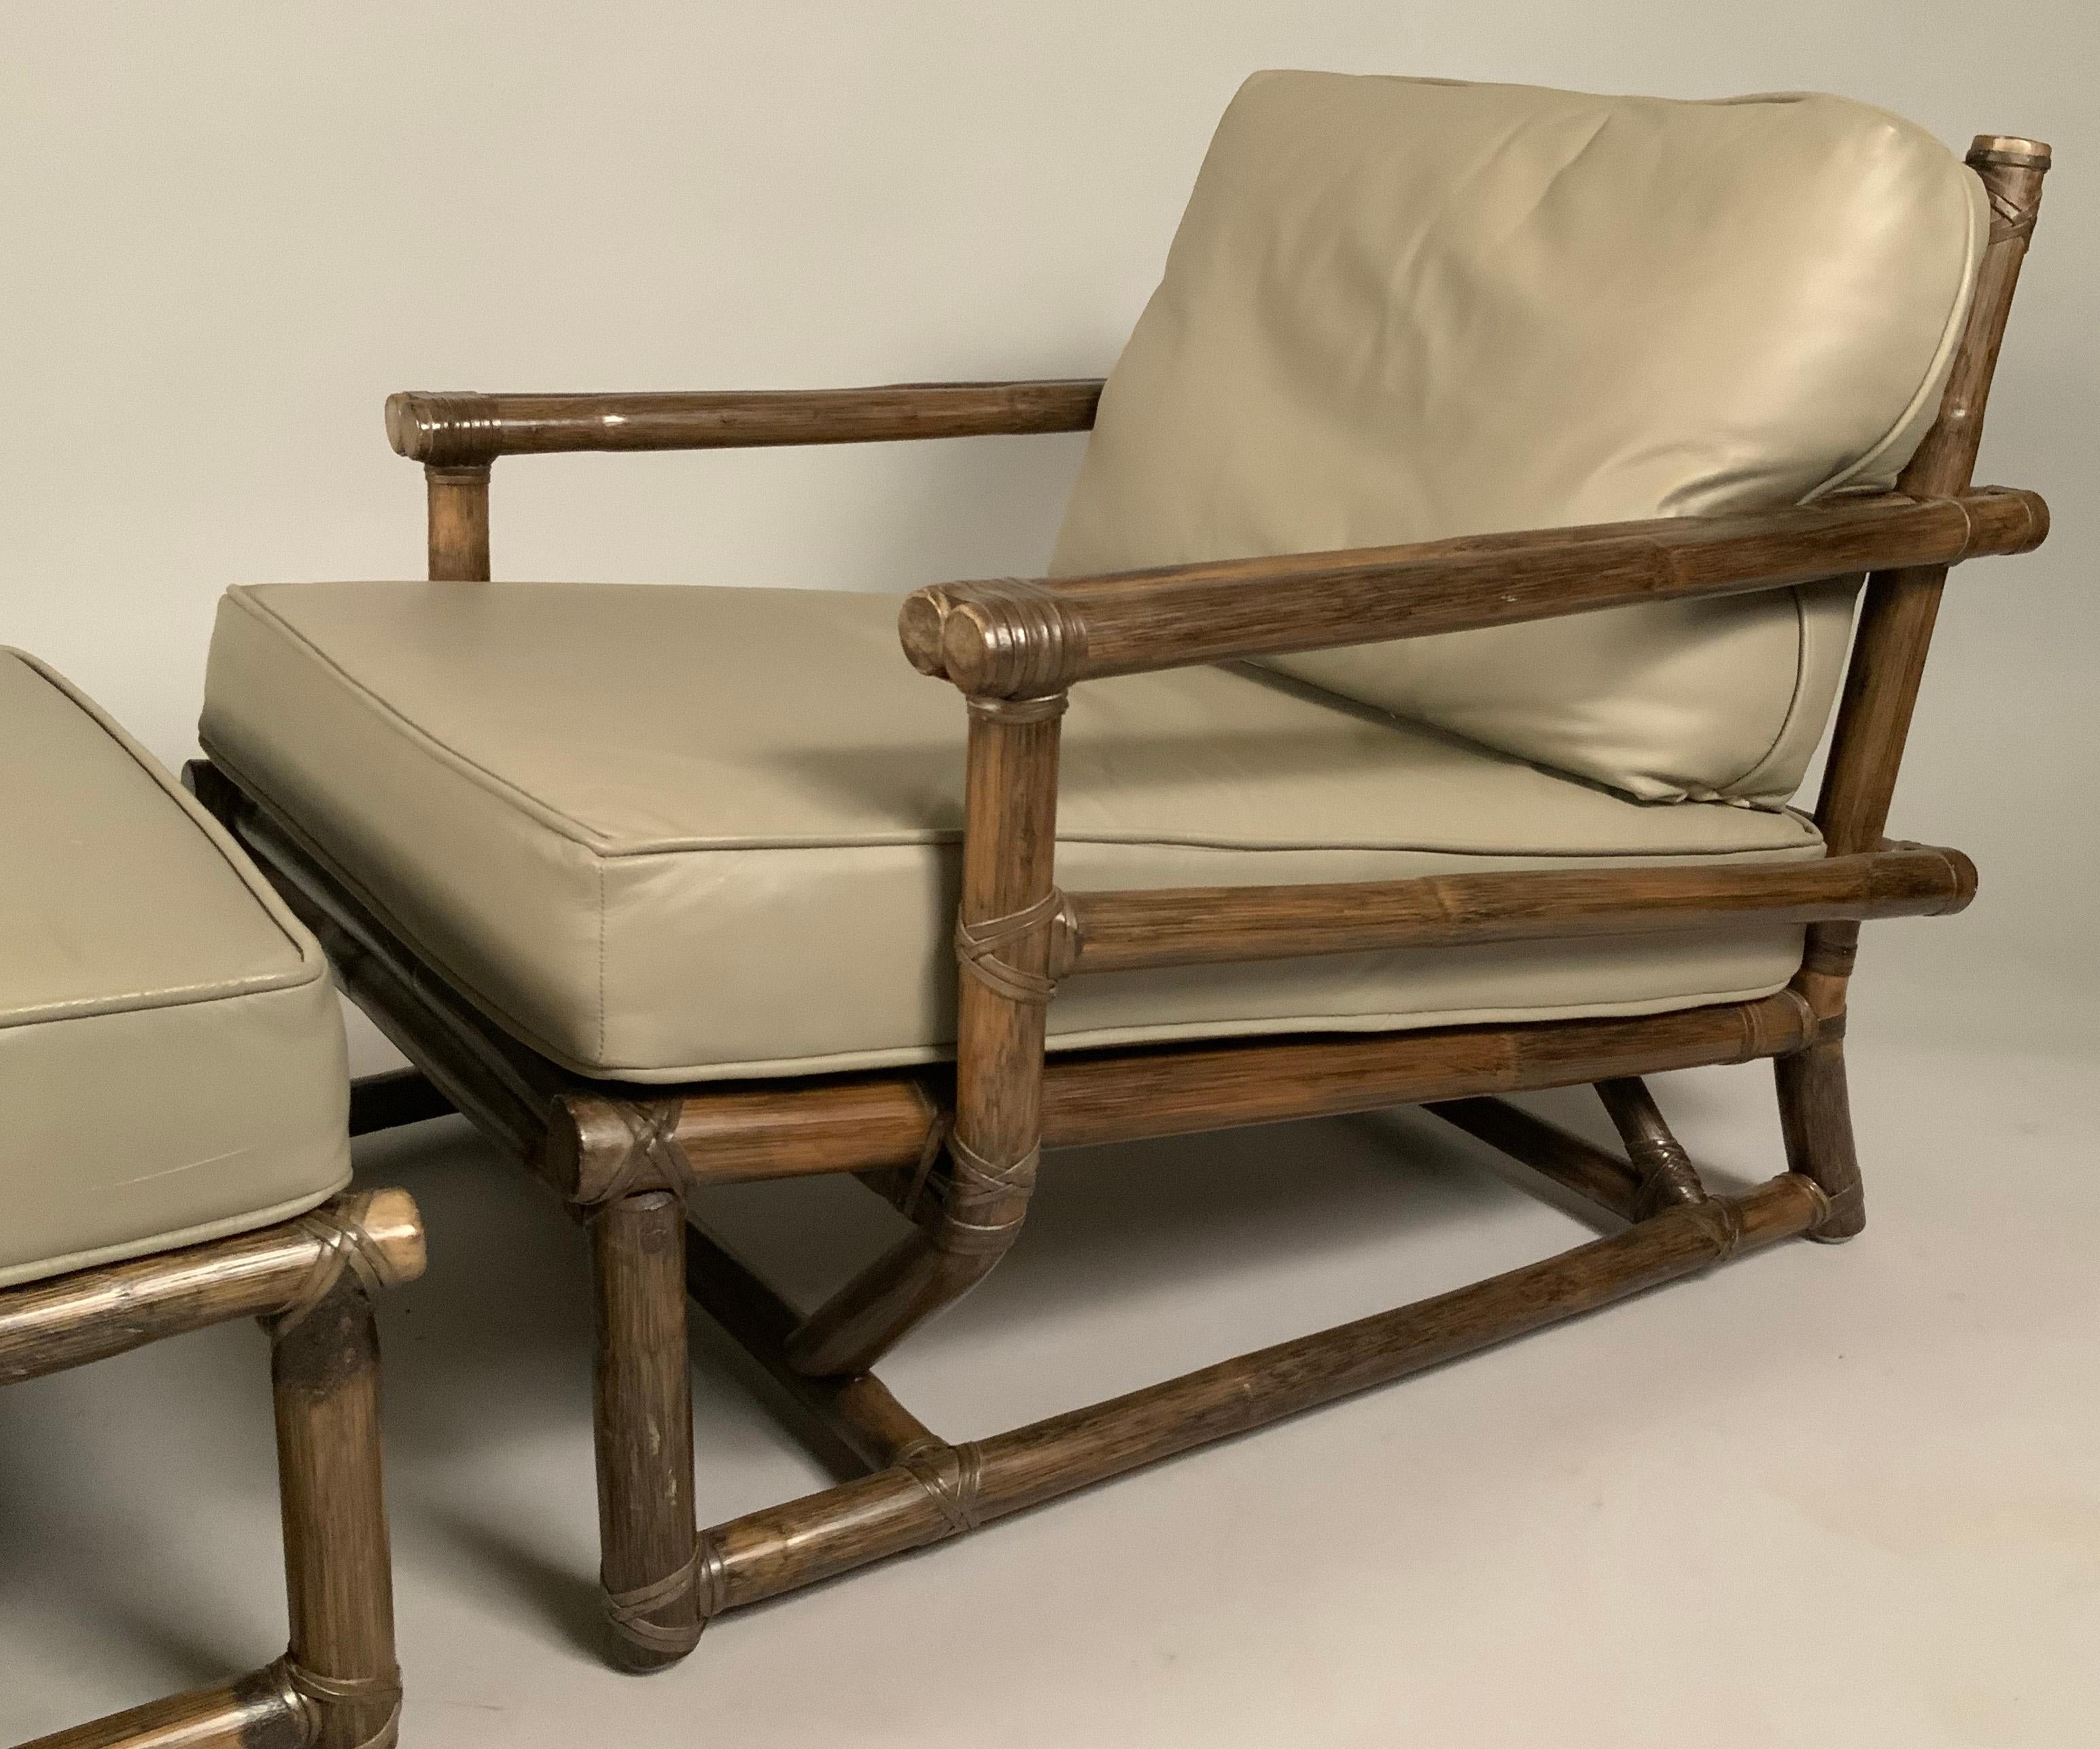 A beautiful large scale rattan frame lounge chair and matching ottoman by Mcguire. The frame made from rattan and lacing, and the cushions upholstered in greige leather. The frames and the leather cushions are in excellent condition.

Ottoman